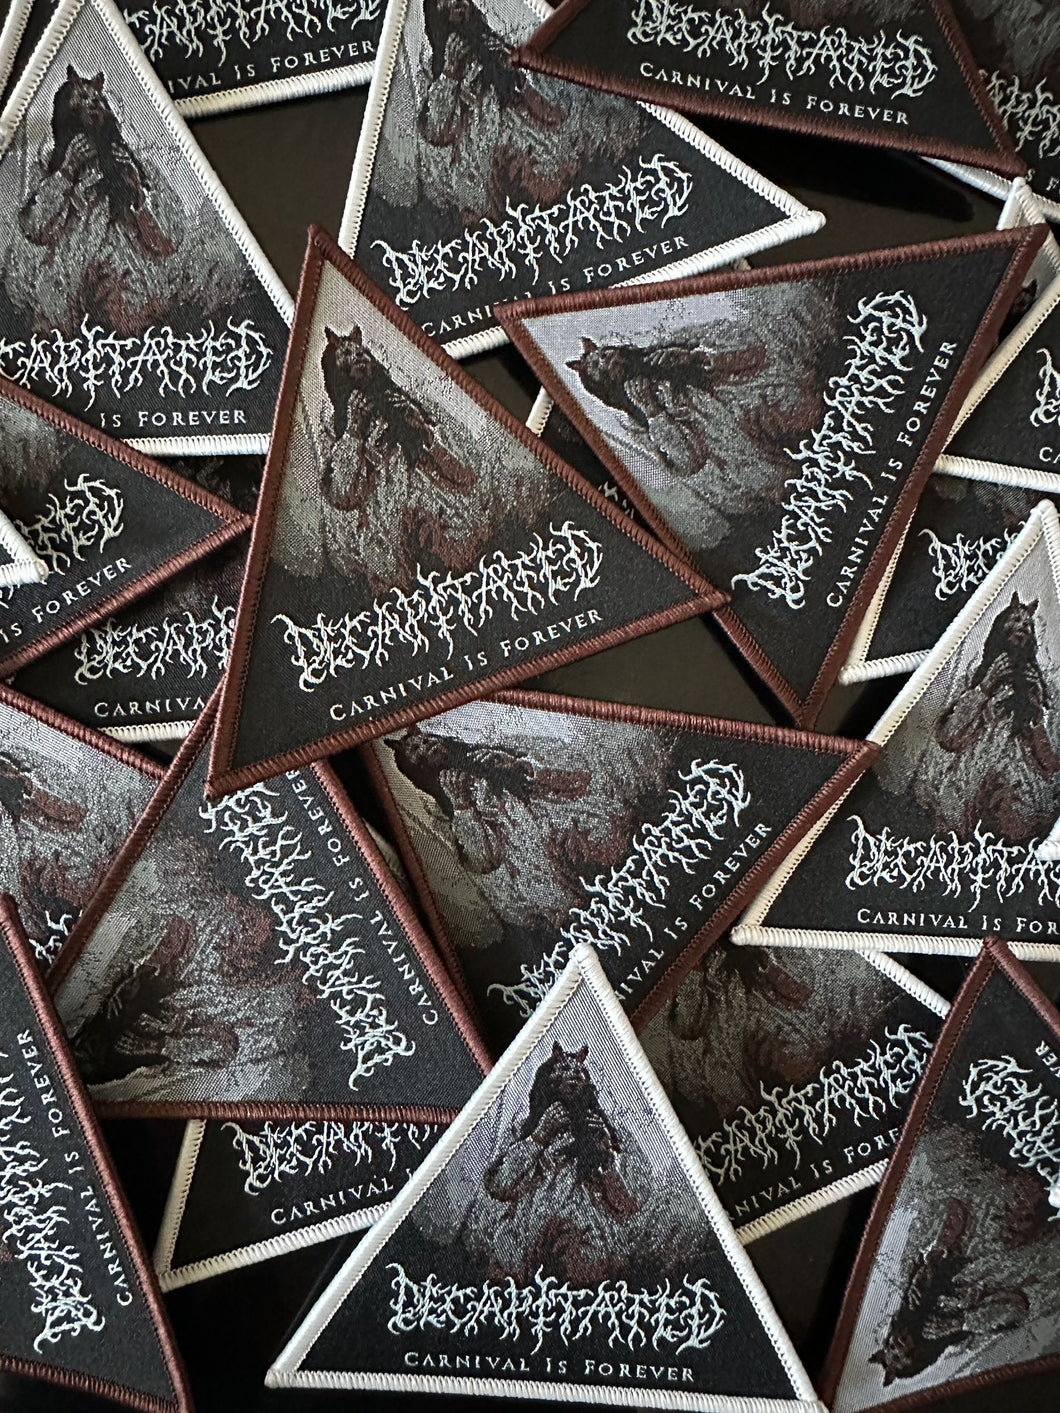 DECAPITATED - CARNIVAL IS FOREVER patch